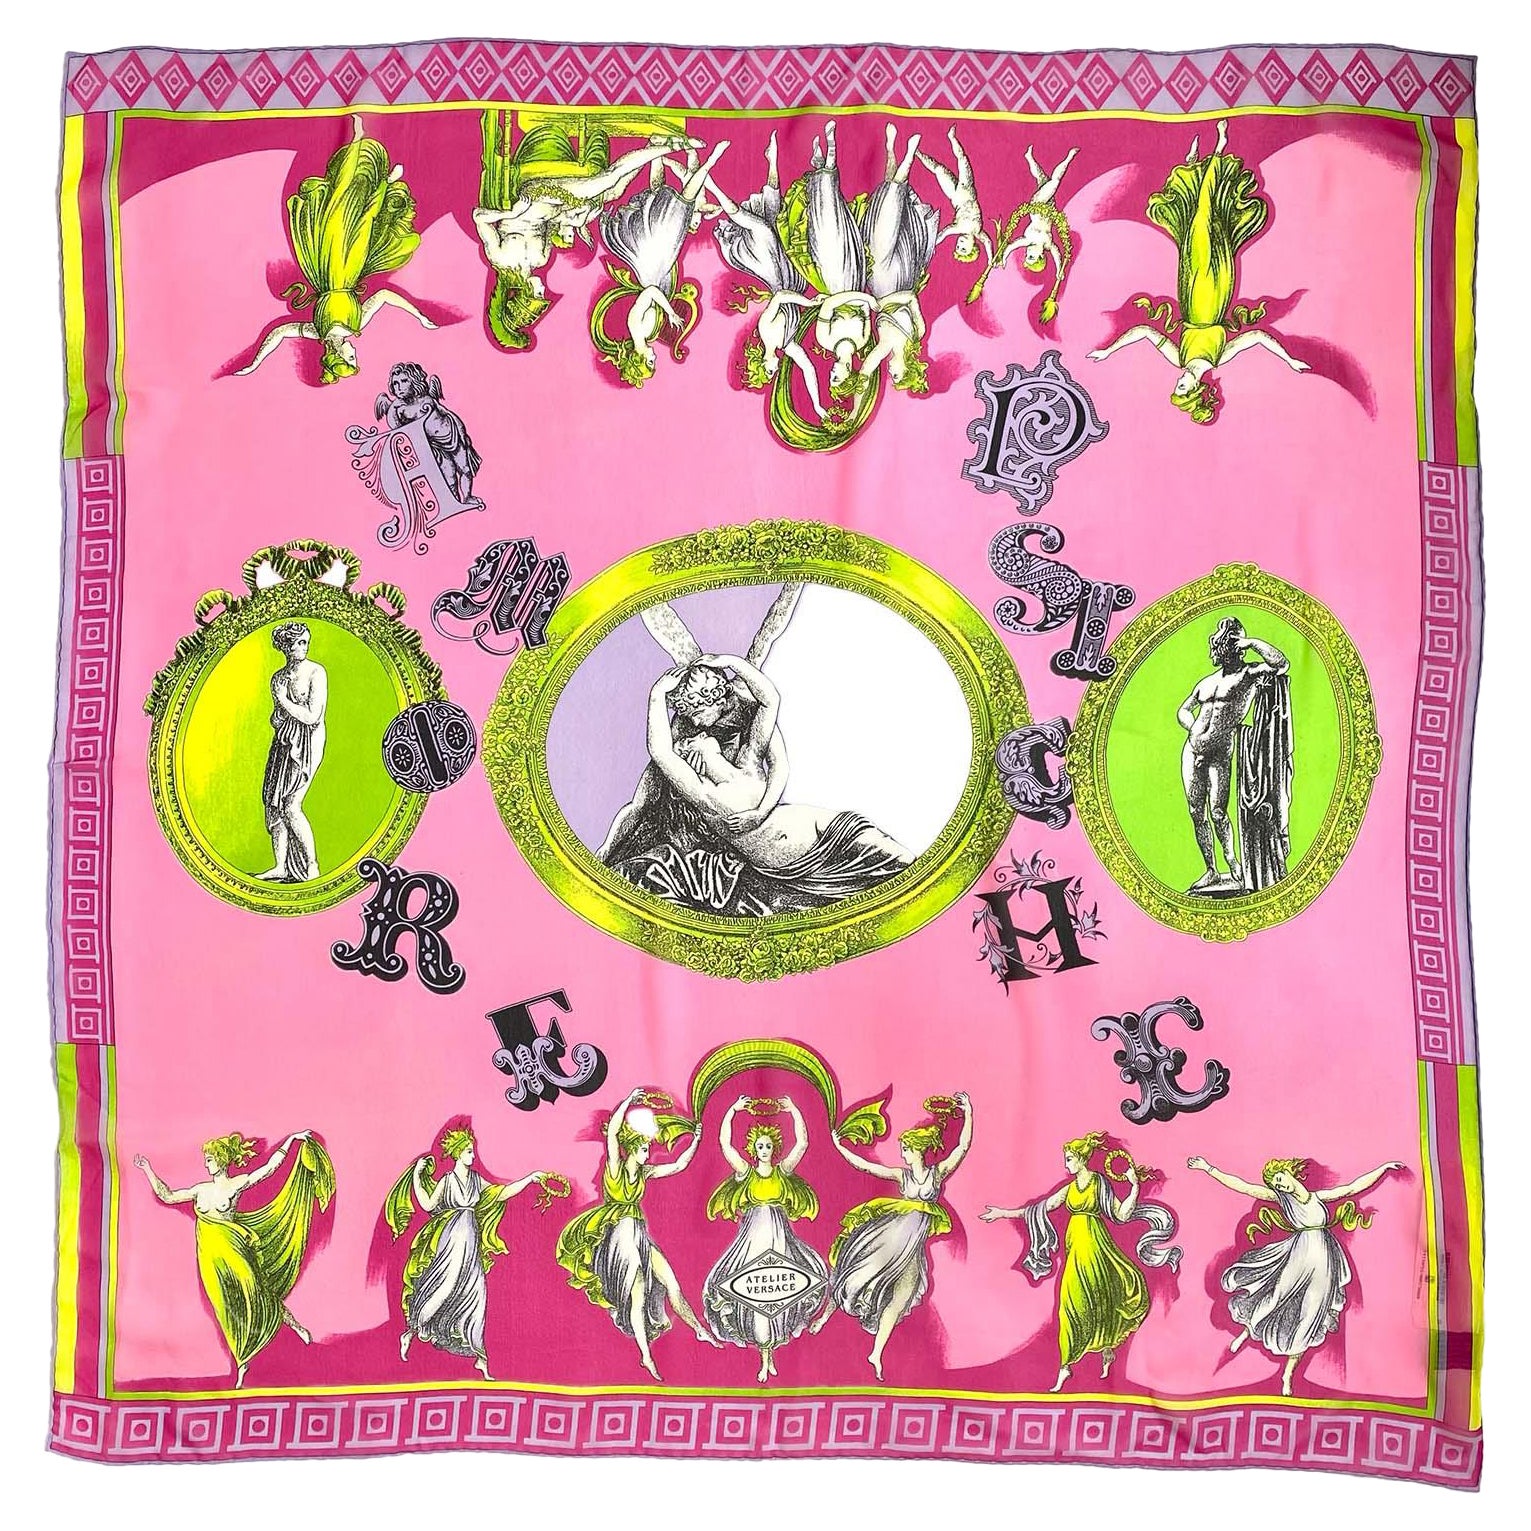 1990s Atelier Versace by Gianni Versace Amore Psiche Neon Silk Square Scarf New For Sale